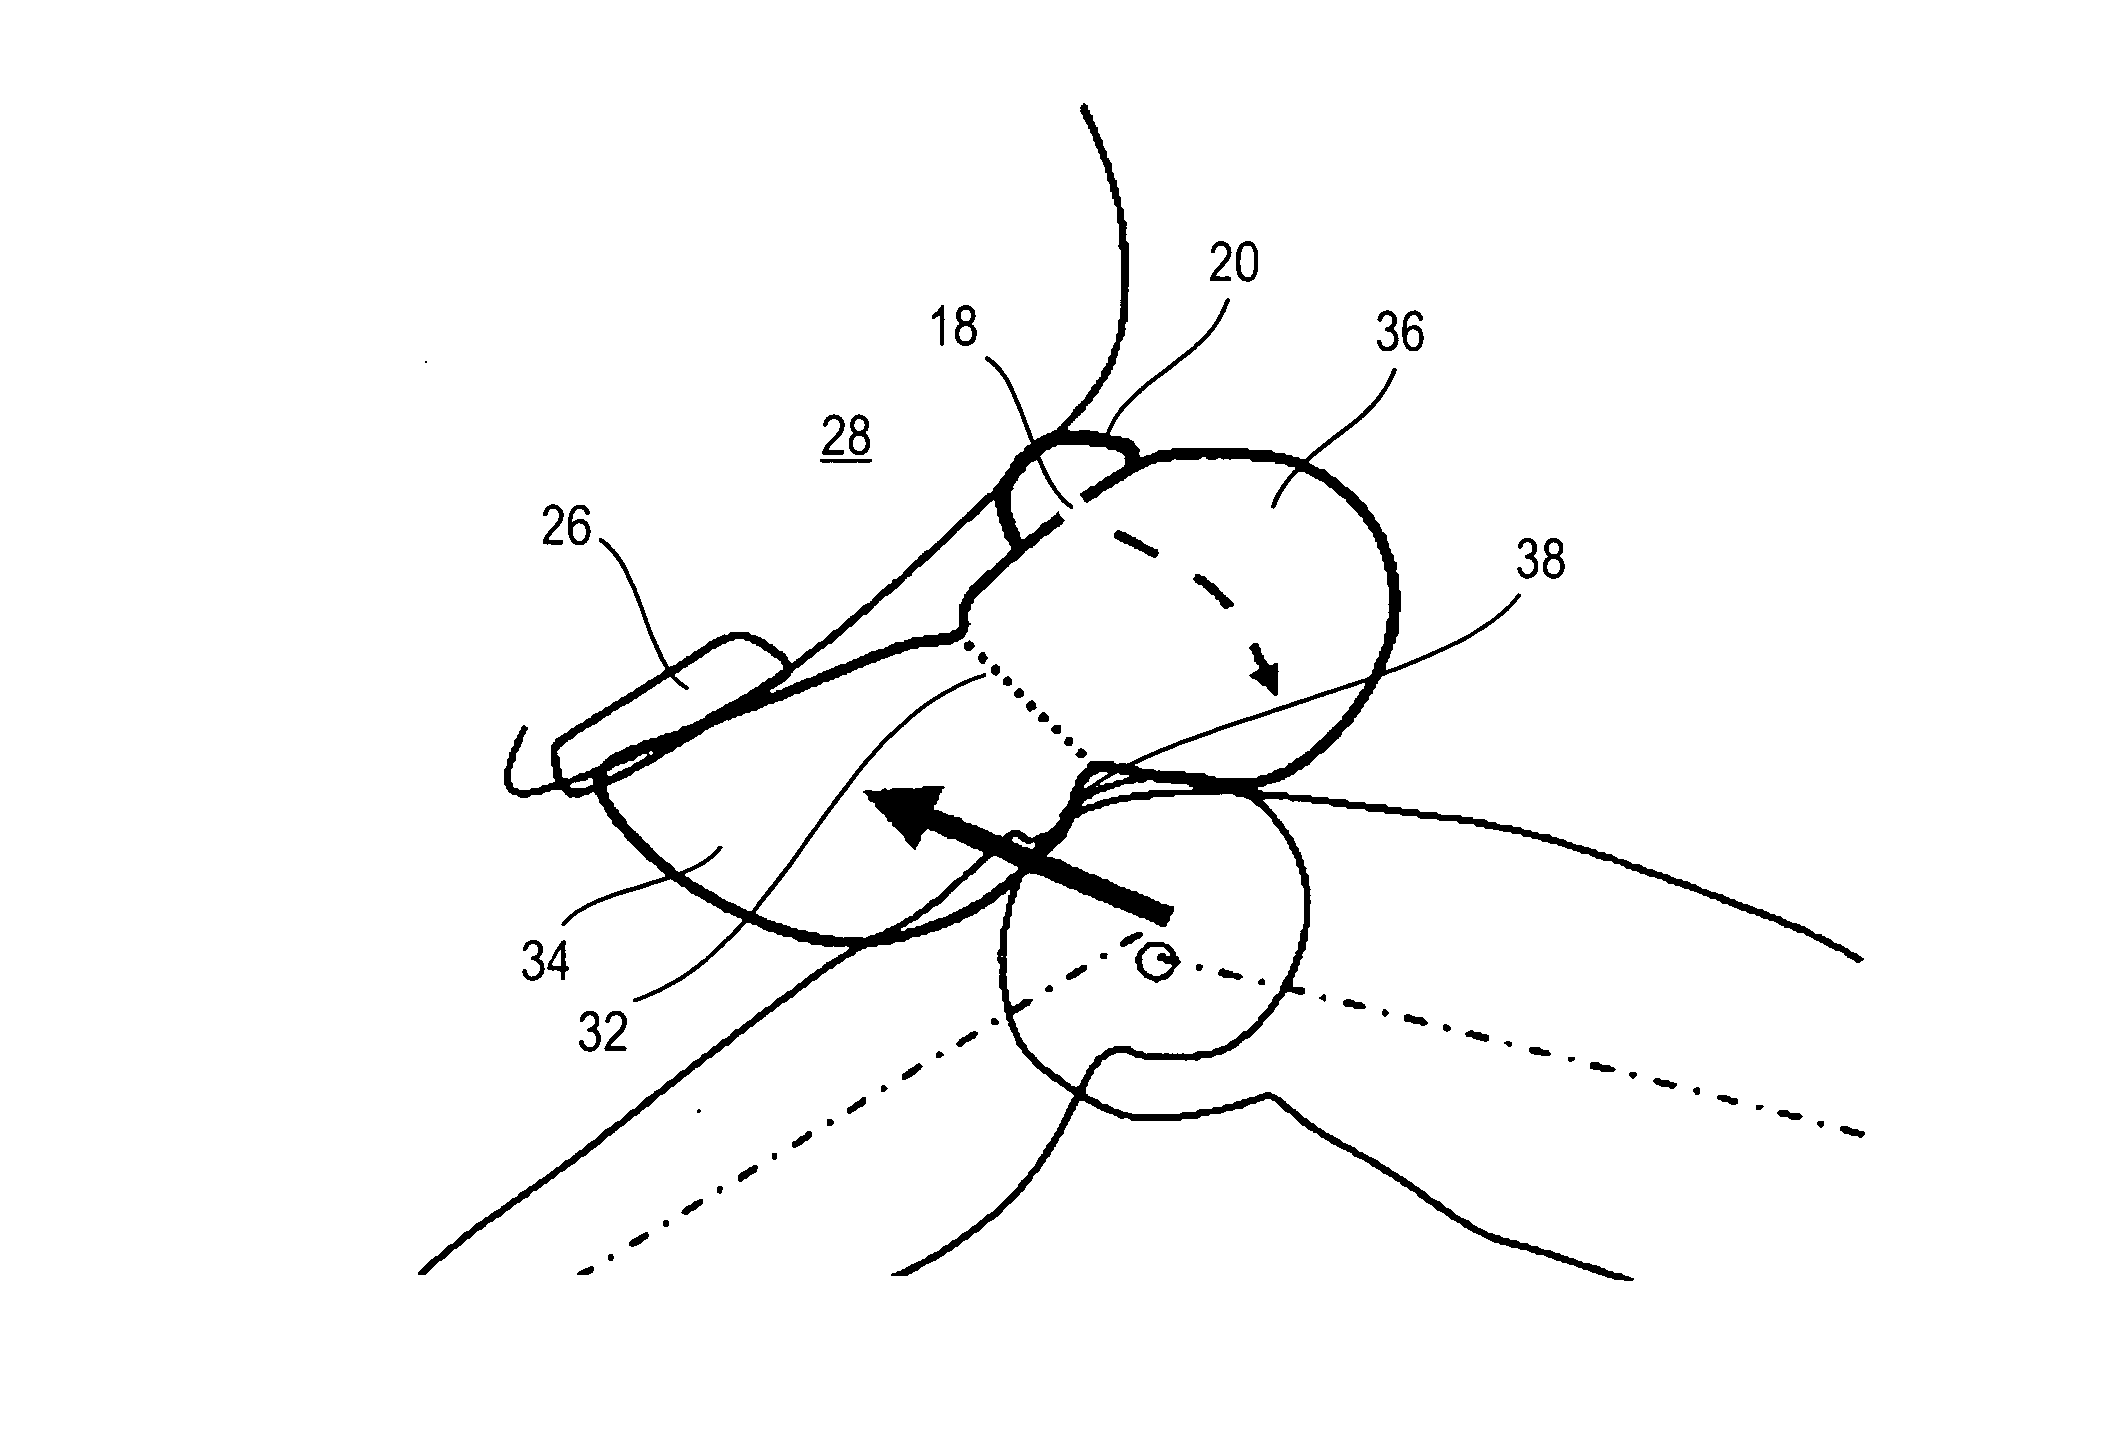 Vehicle occupant system having an adaptive knee airbag